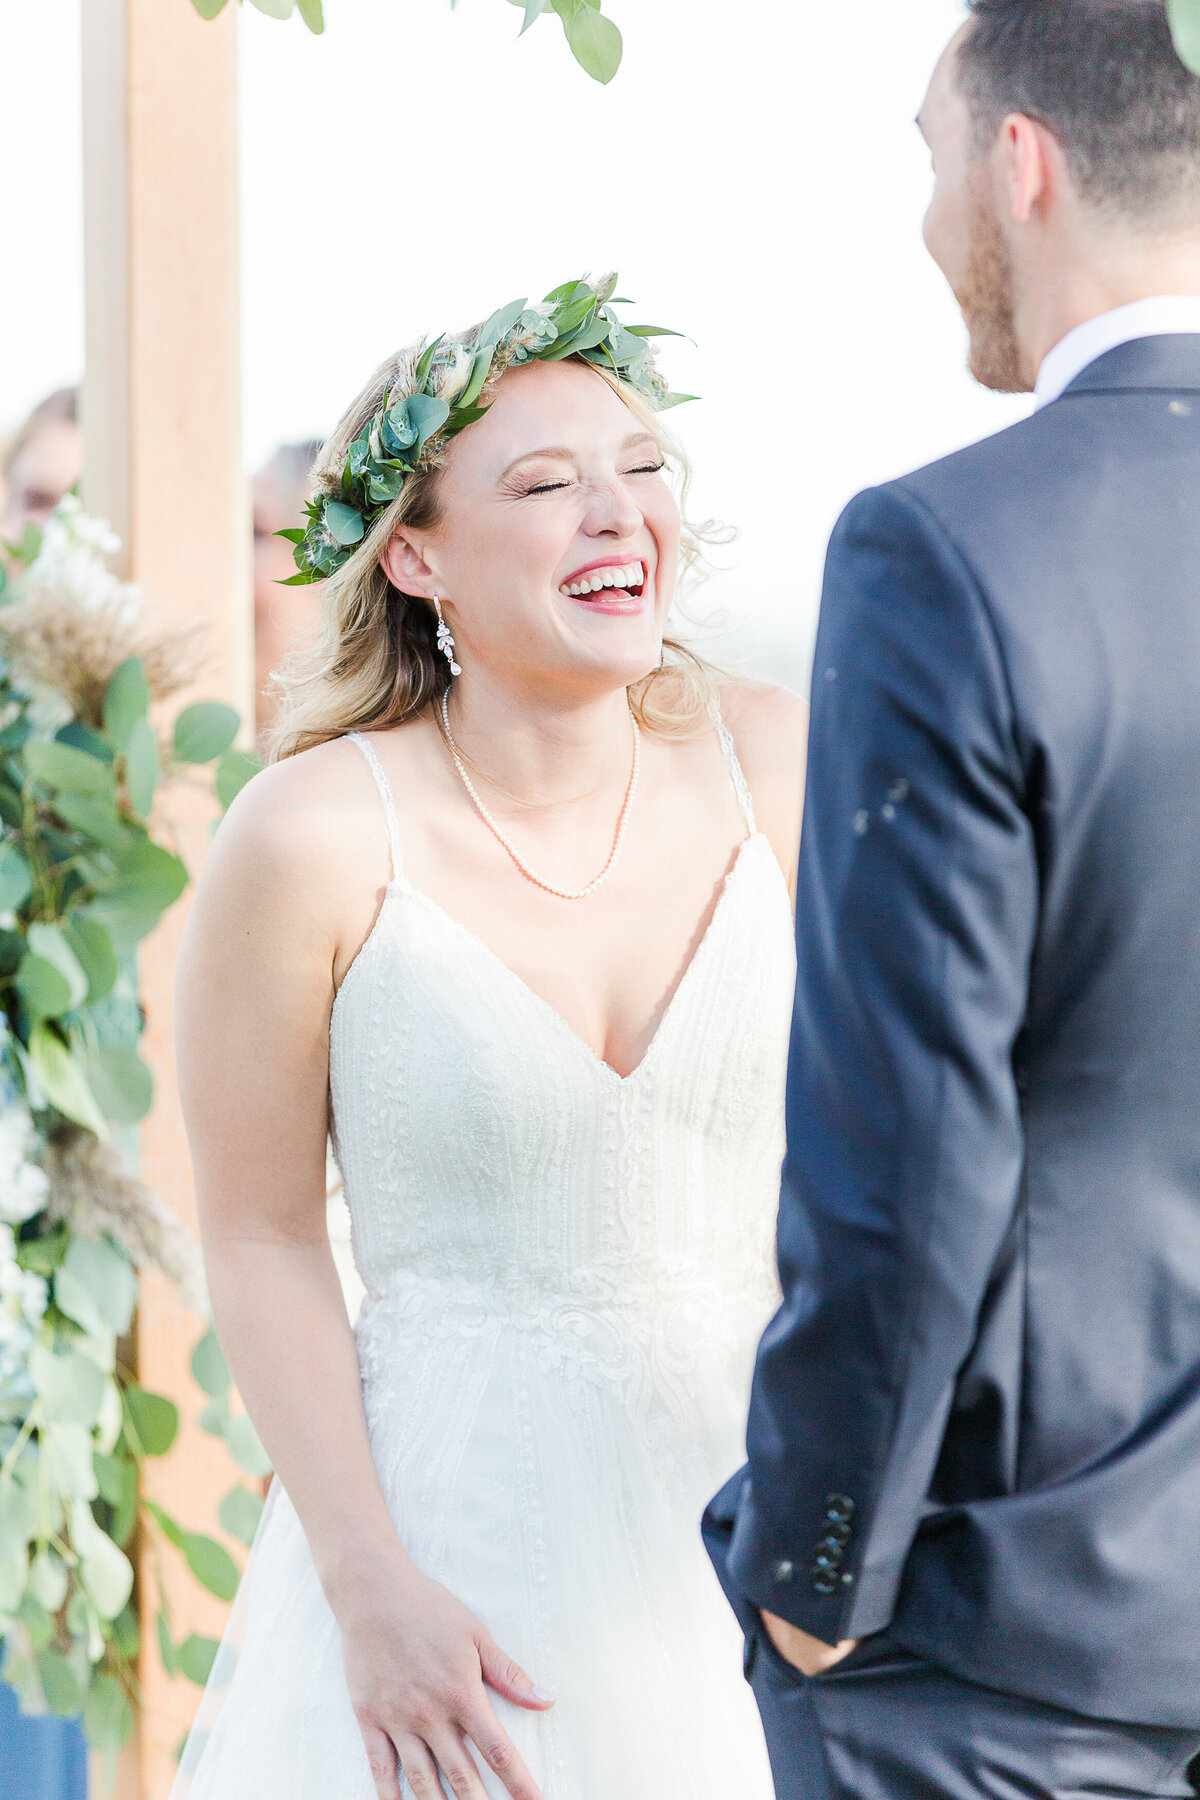 Bride is captured laughing during her wedding ceremony at the Madison Beach Hotel. Captured by best New England wedding photographer Lia Rose Weddings.